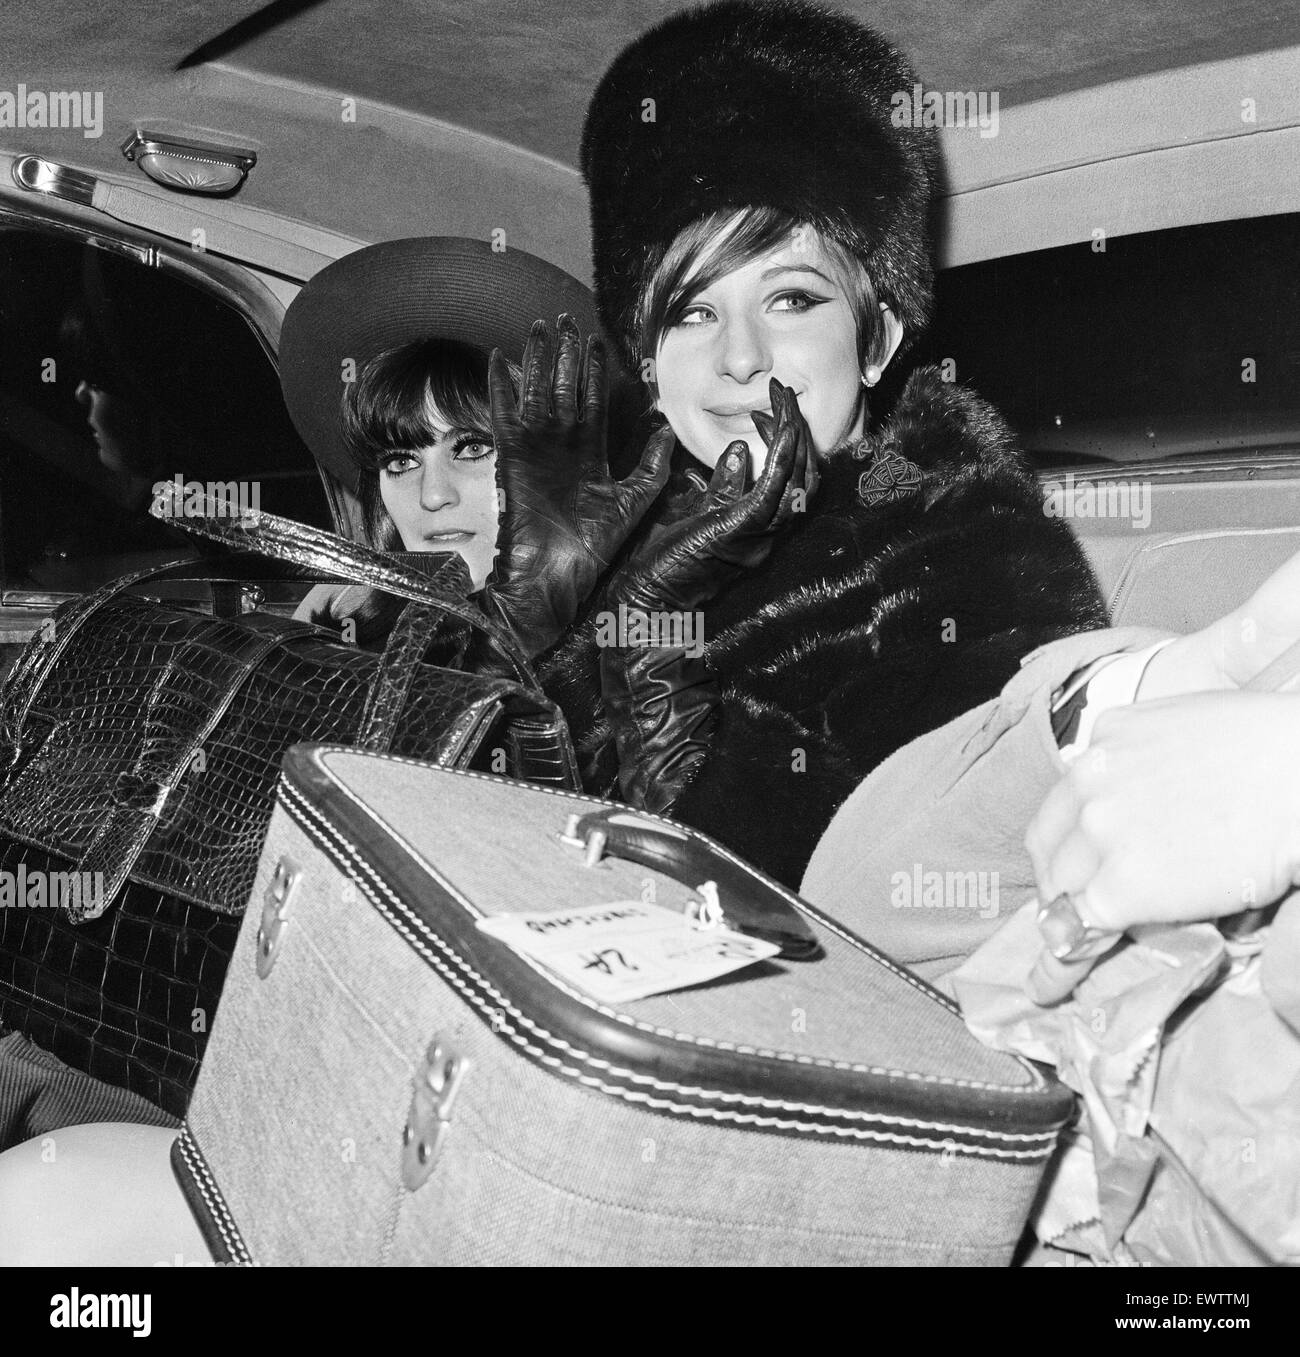 Barbra Streisand, Actress and Singer, arrives at London Heathrow Airport, 17th March 1966. She is in the UK to star in her Broadway Show Funny Girl, which opens in the West End next month. Stock Photo